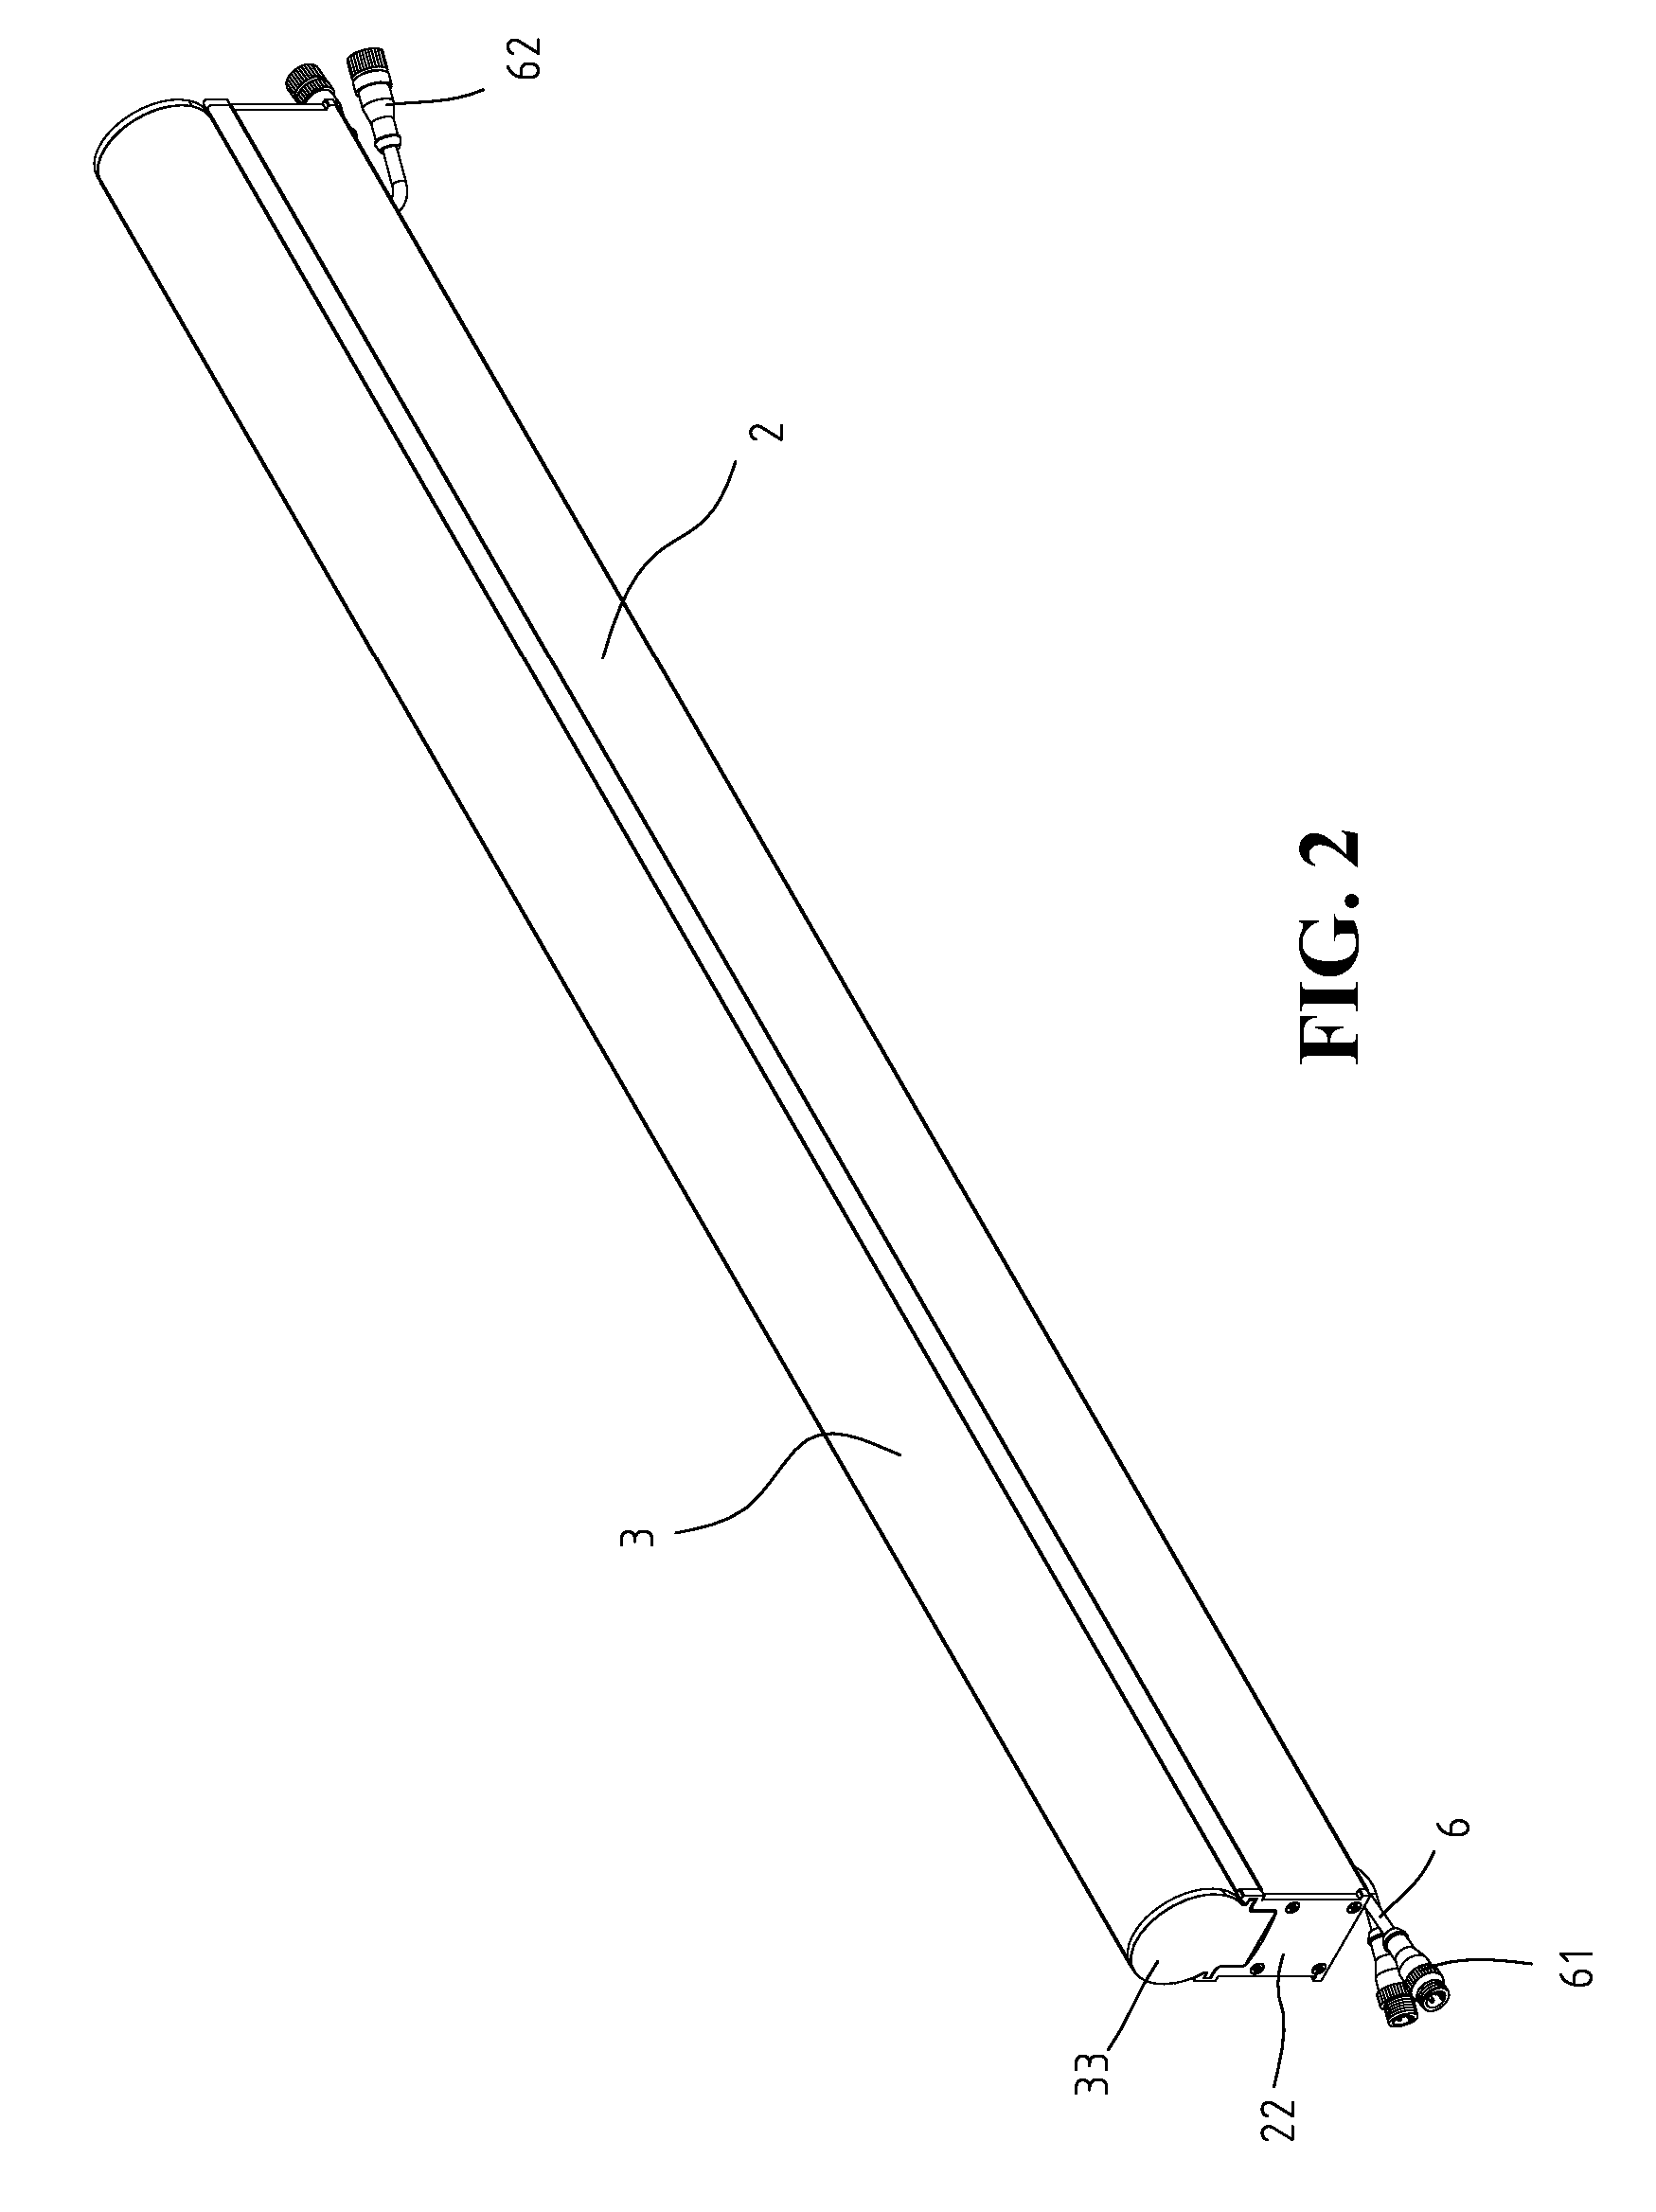 Structure for a high efficiency and water-proof lighting device